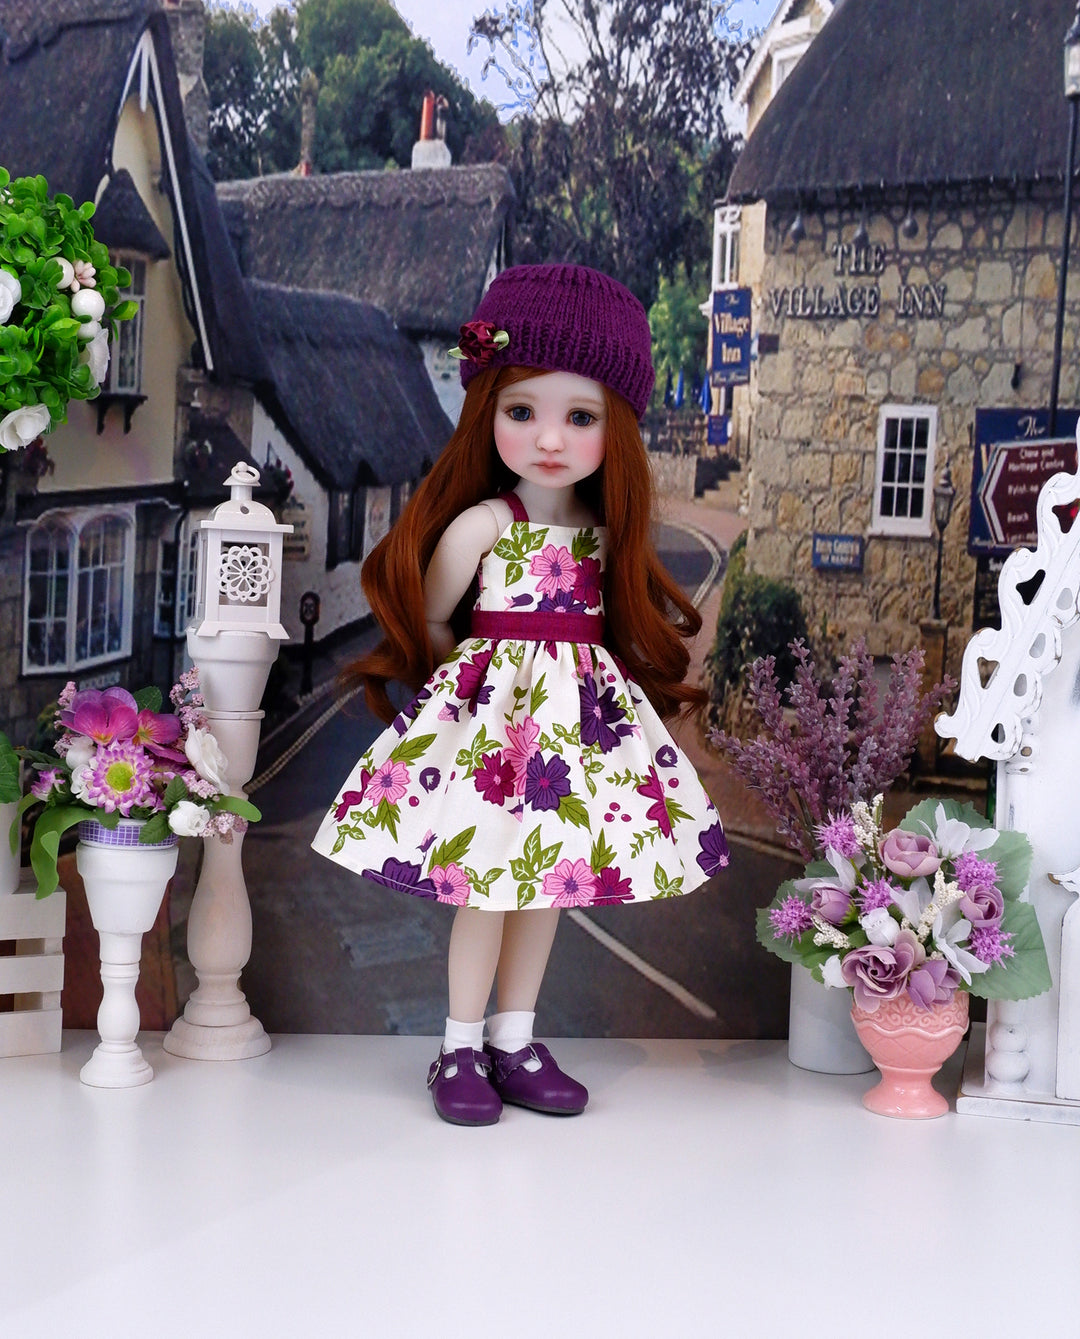 Berry Briar - dress and sweater set with shoes for Ruby Red Fashion Friends doll